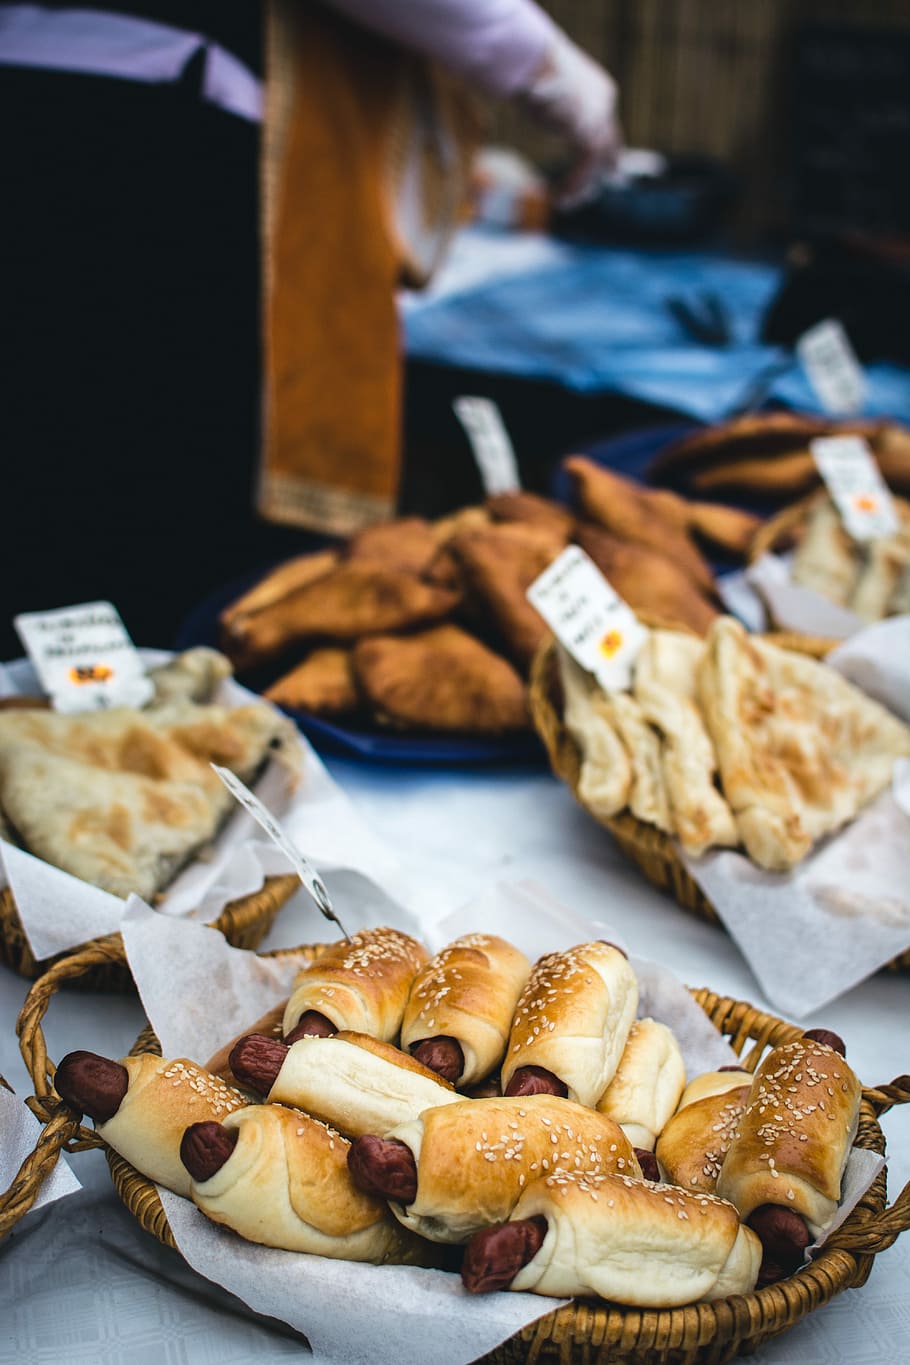 Sausage rolls, outside, pastry, snack, street food, gourmet, freshness